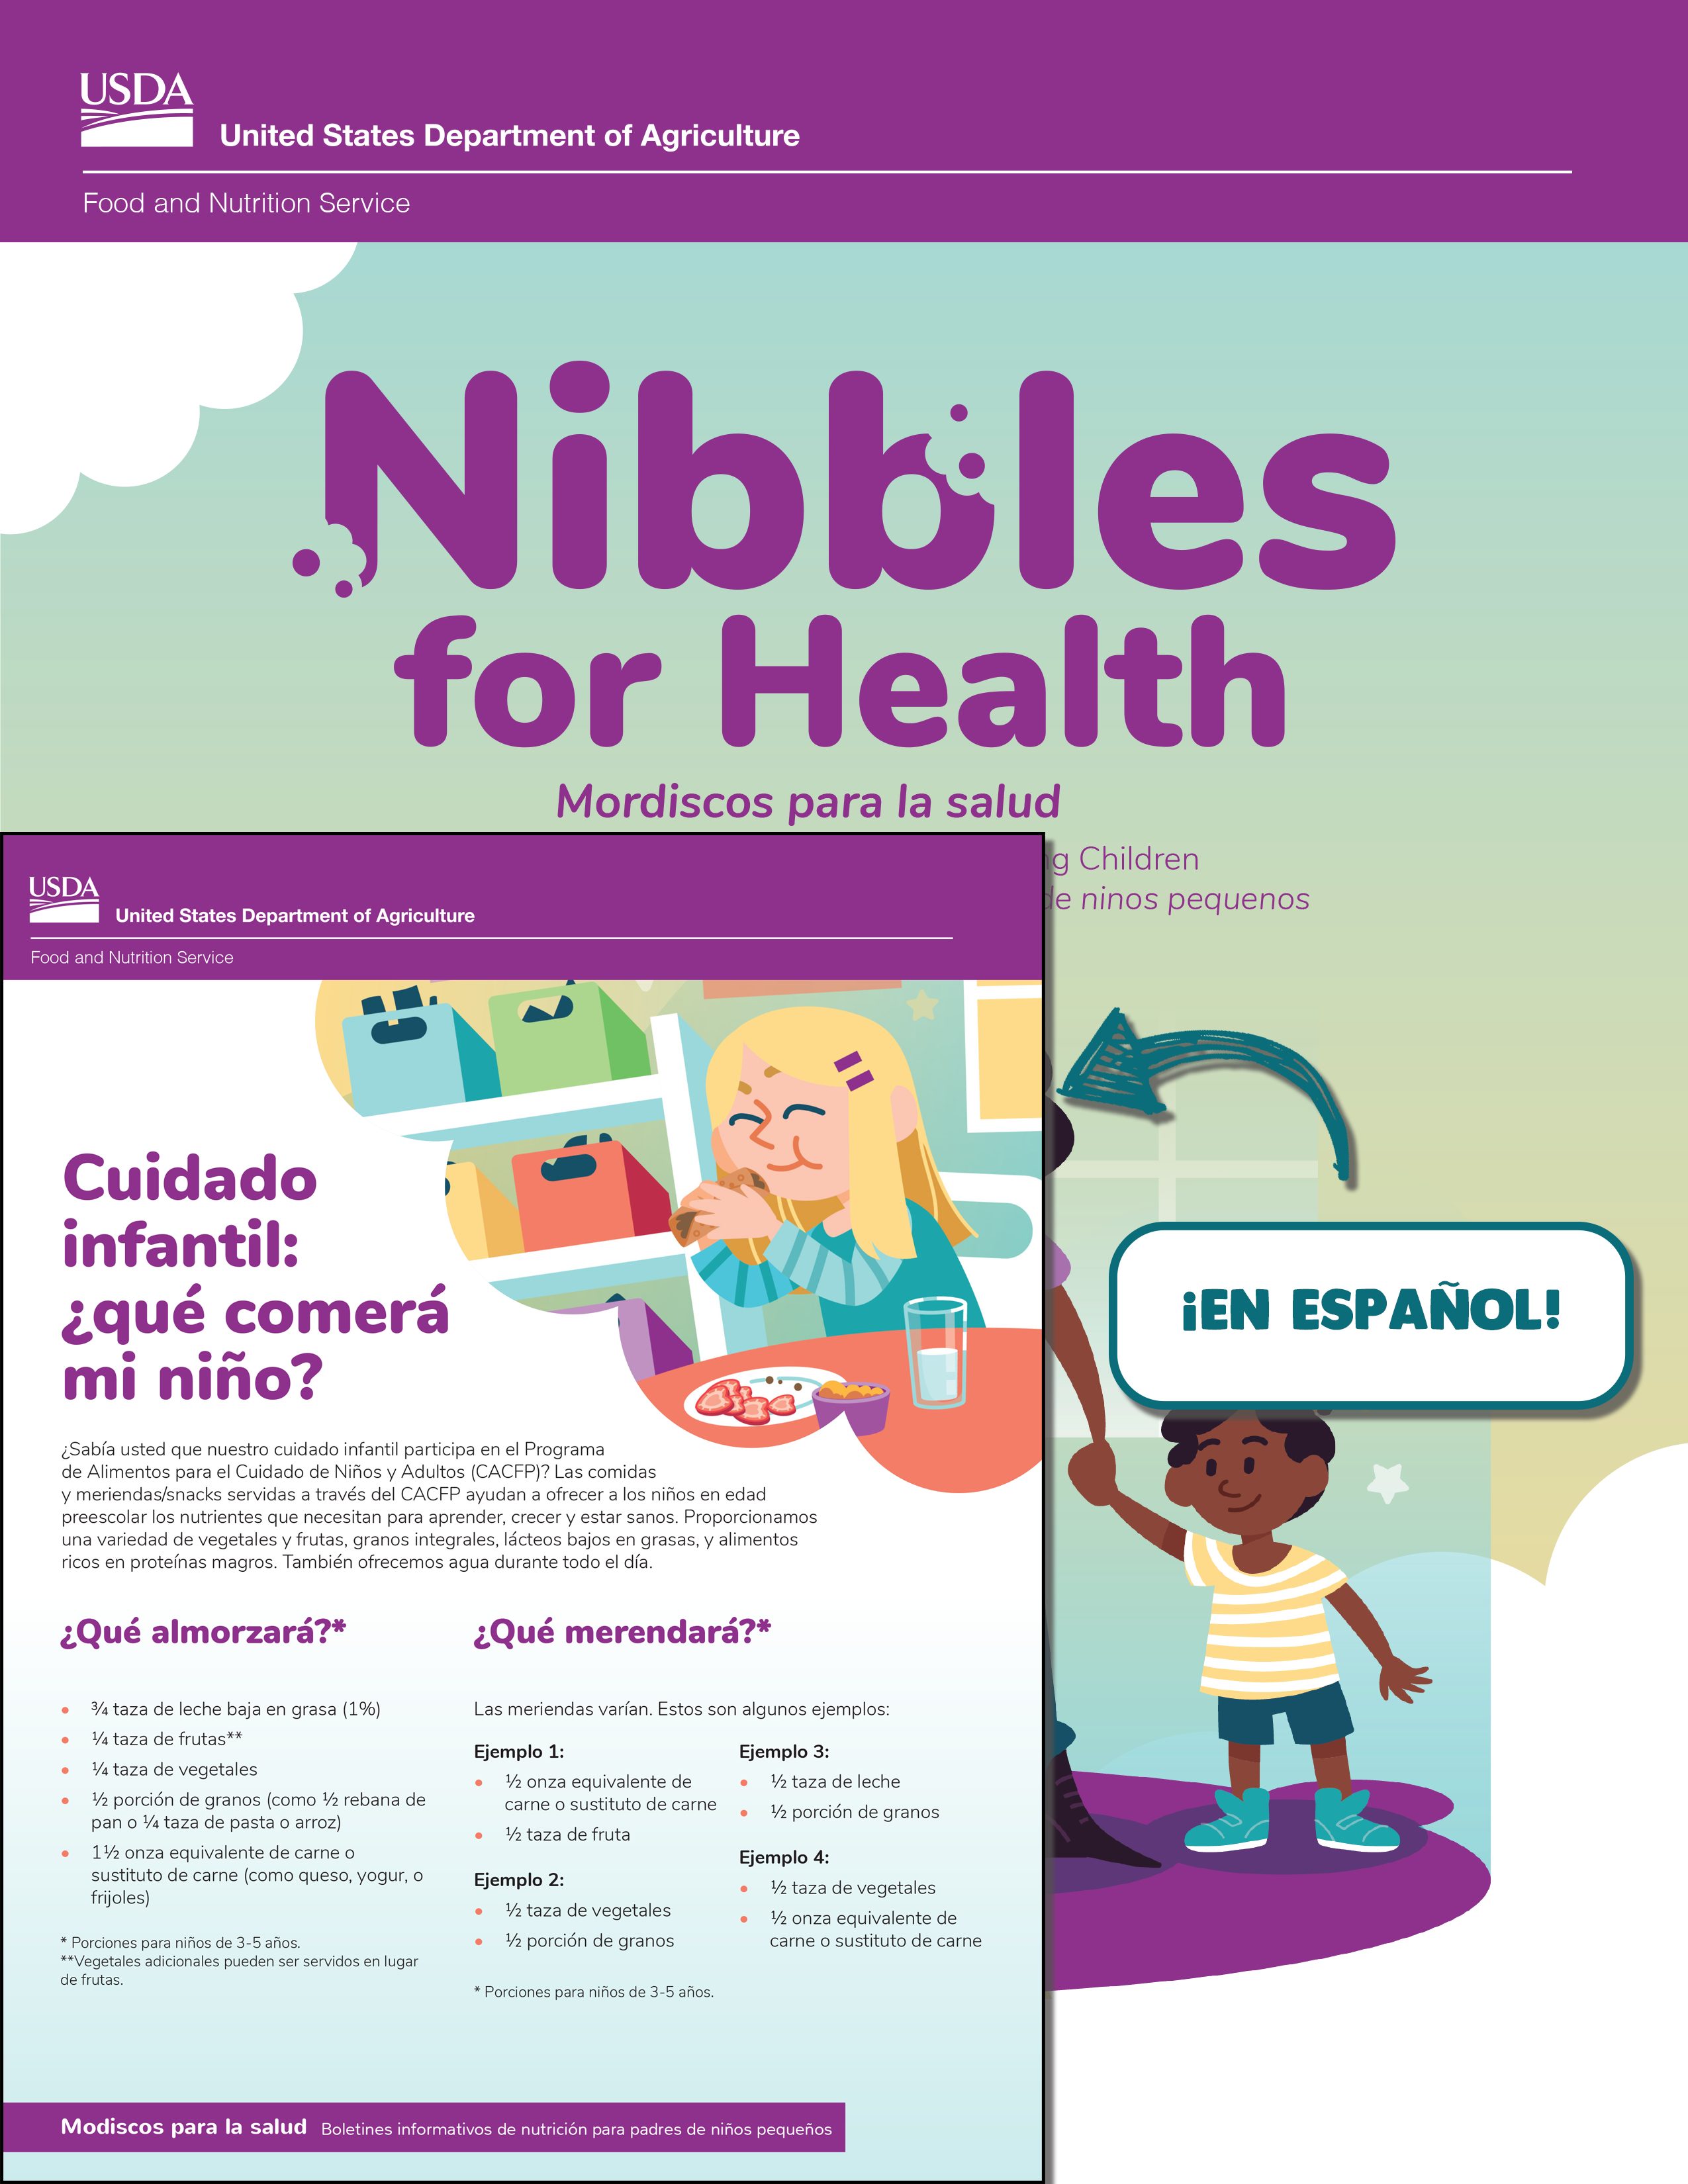 Nibbles for health